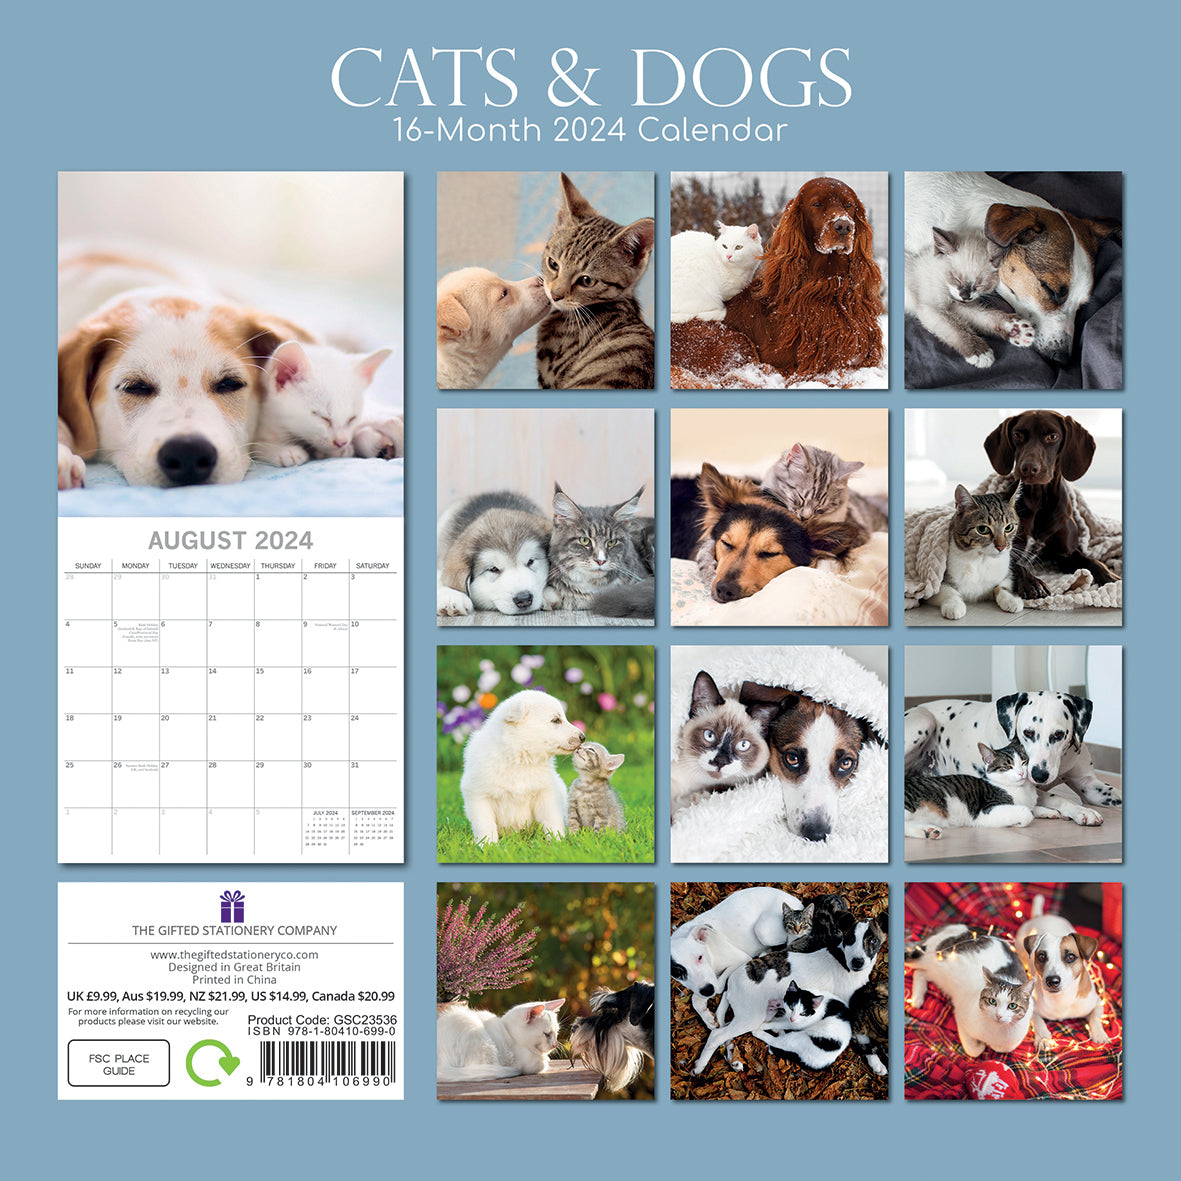 Cats & Dogs - 2024 Square Wall Calendar Pets Animals 16 Months Premium Planner